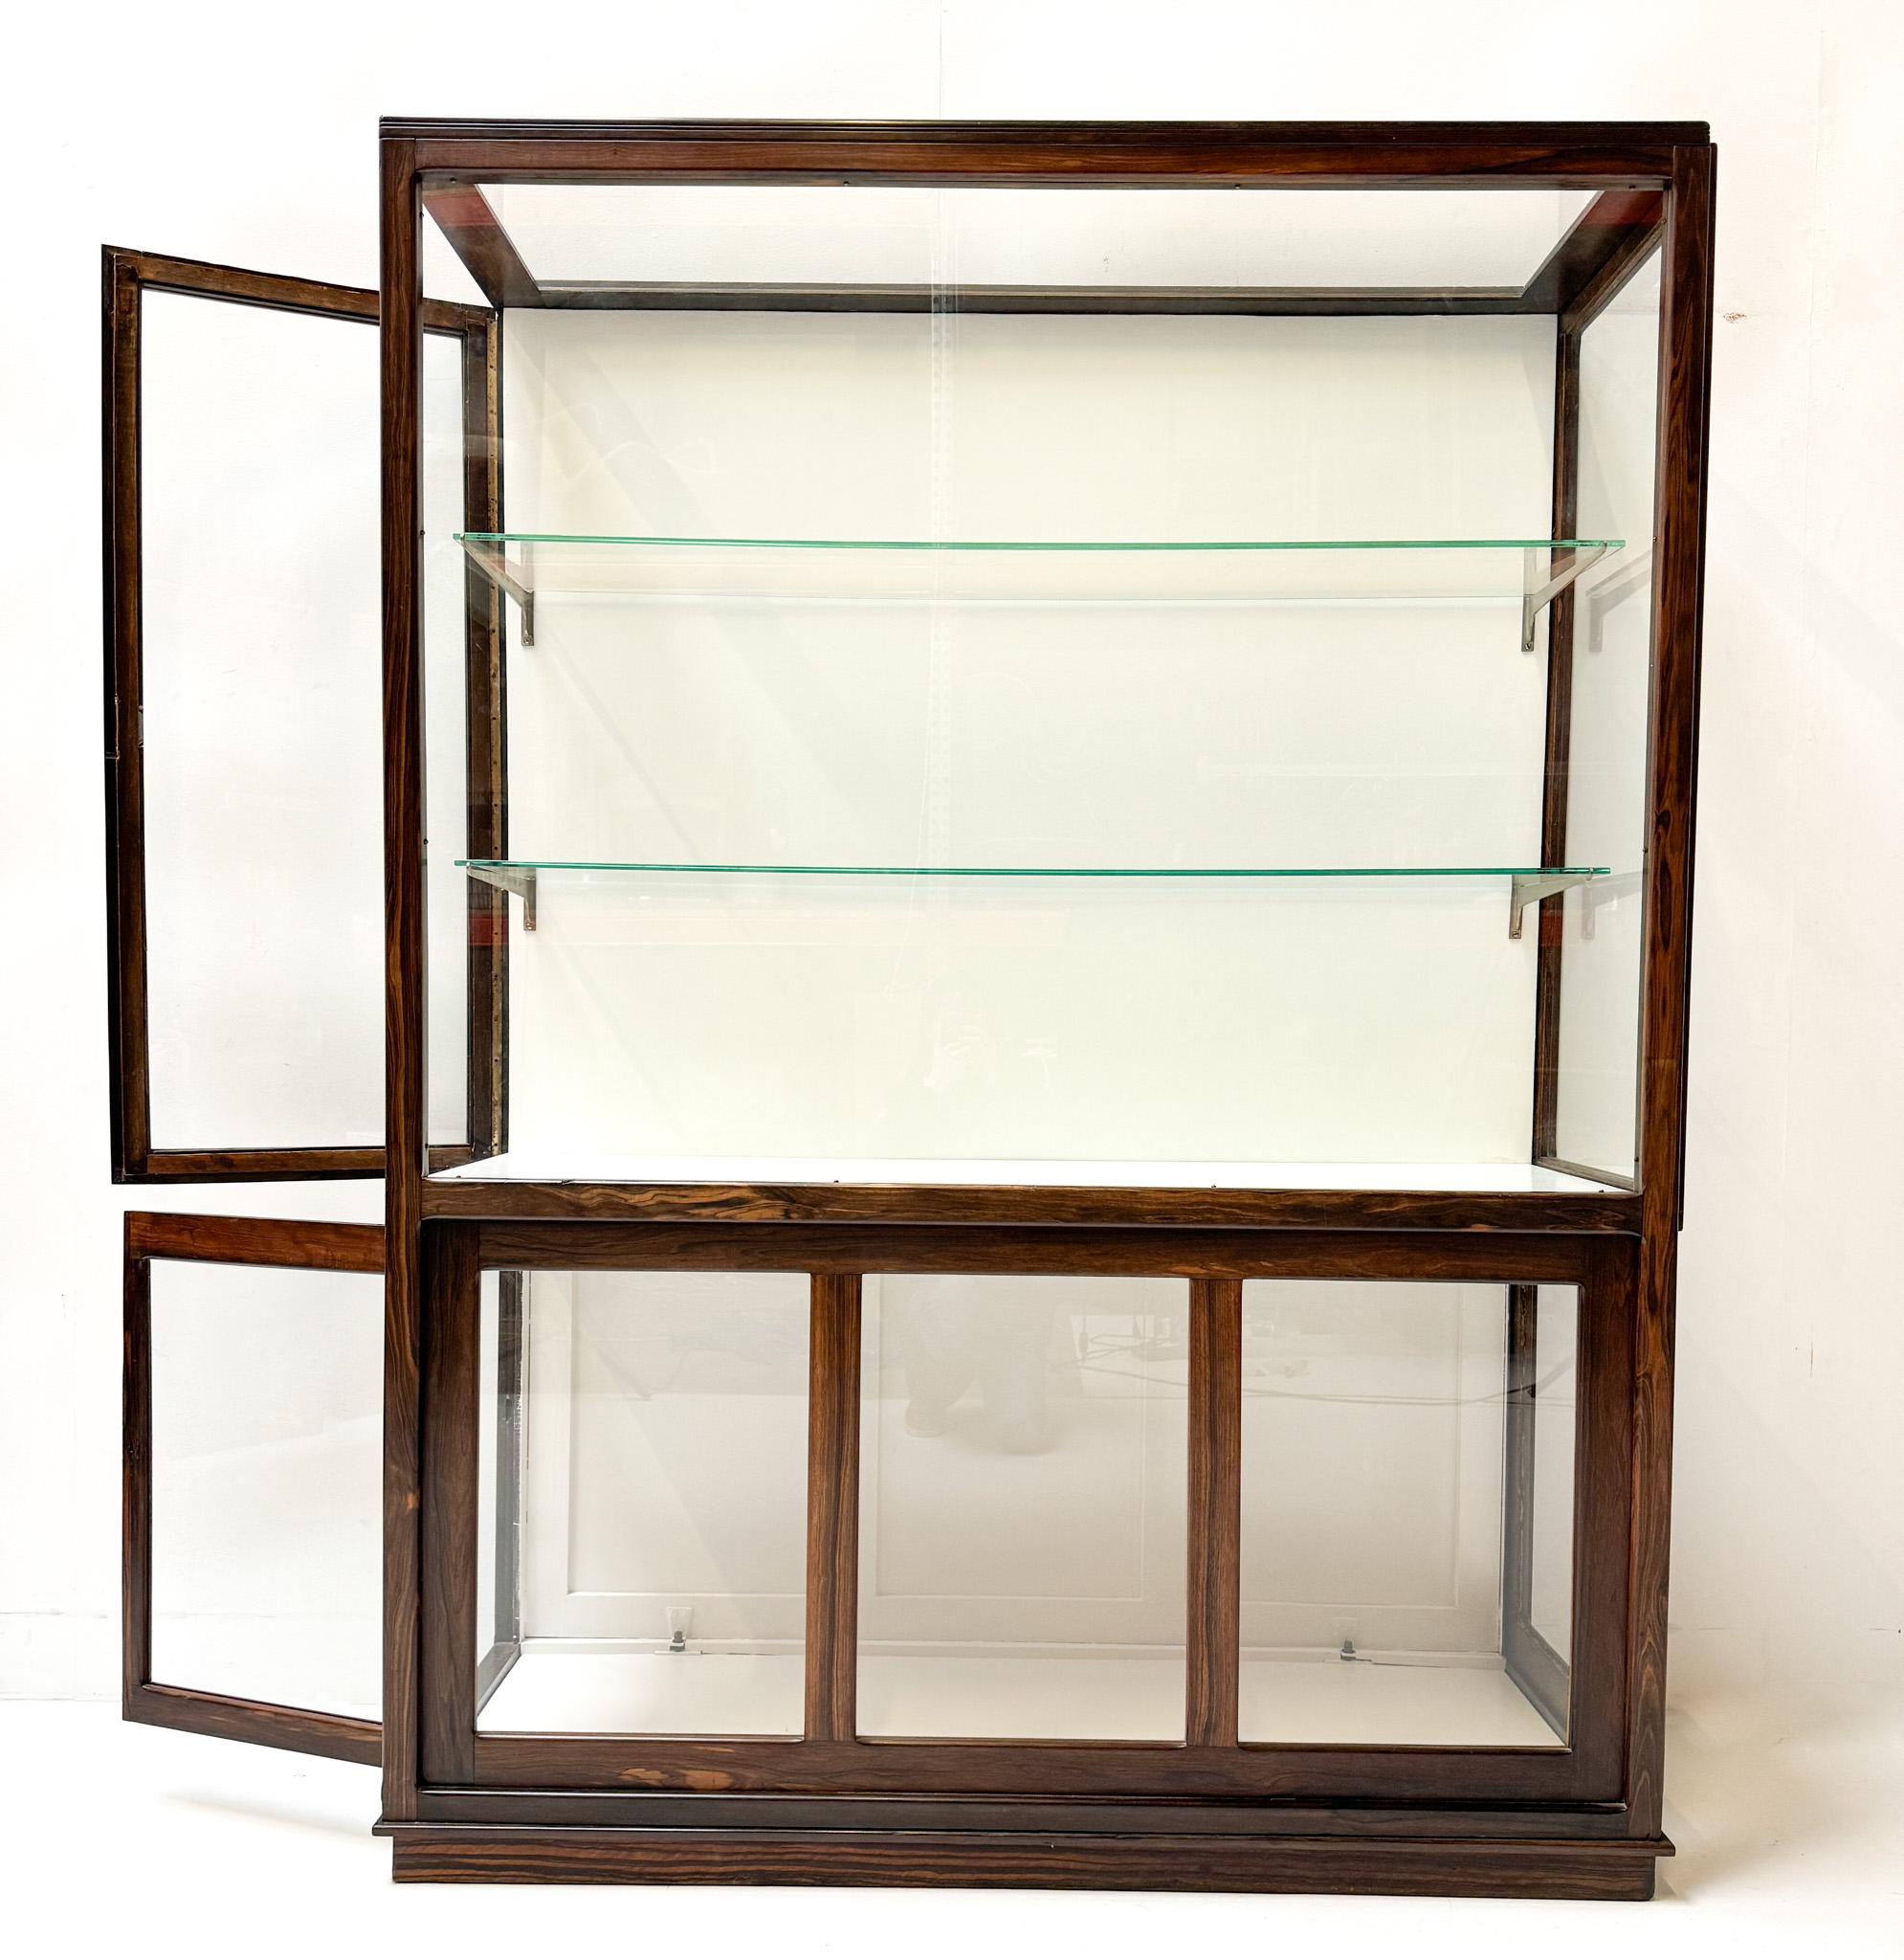 Early 20th Century Macassar Art Deco Amsterdamse School Display Cabinet by Napoleon Le Grand, 1920s For Sale